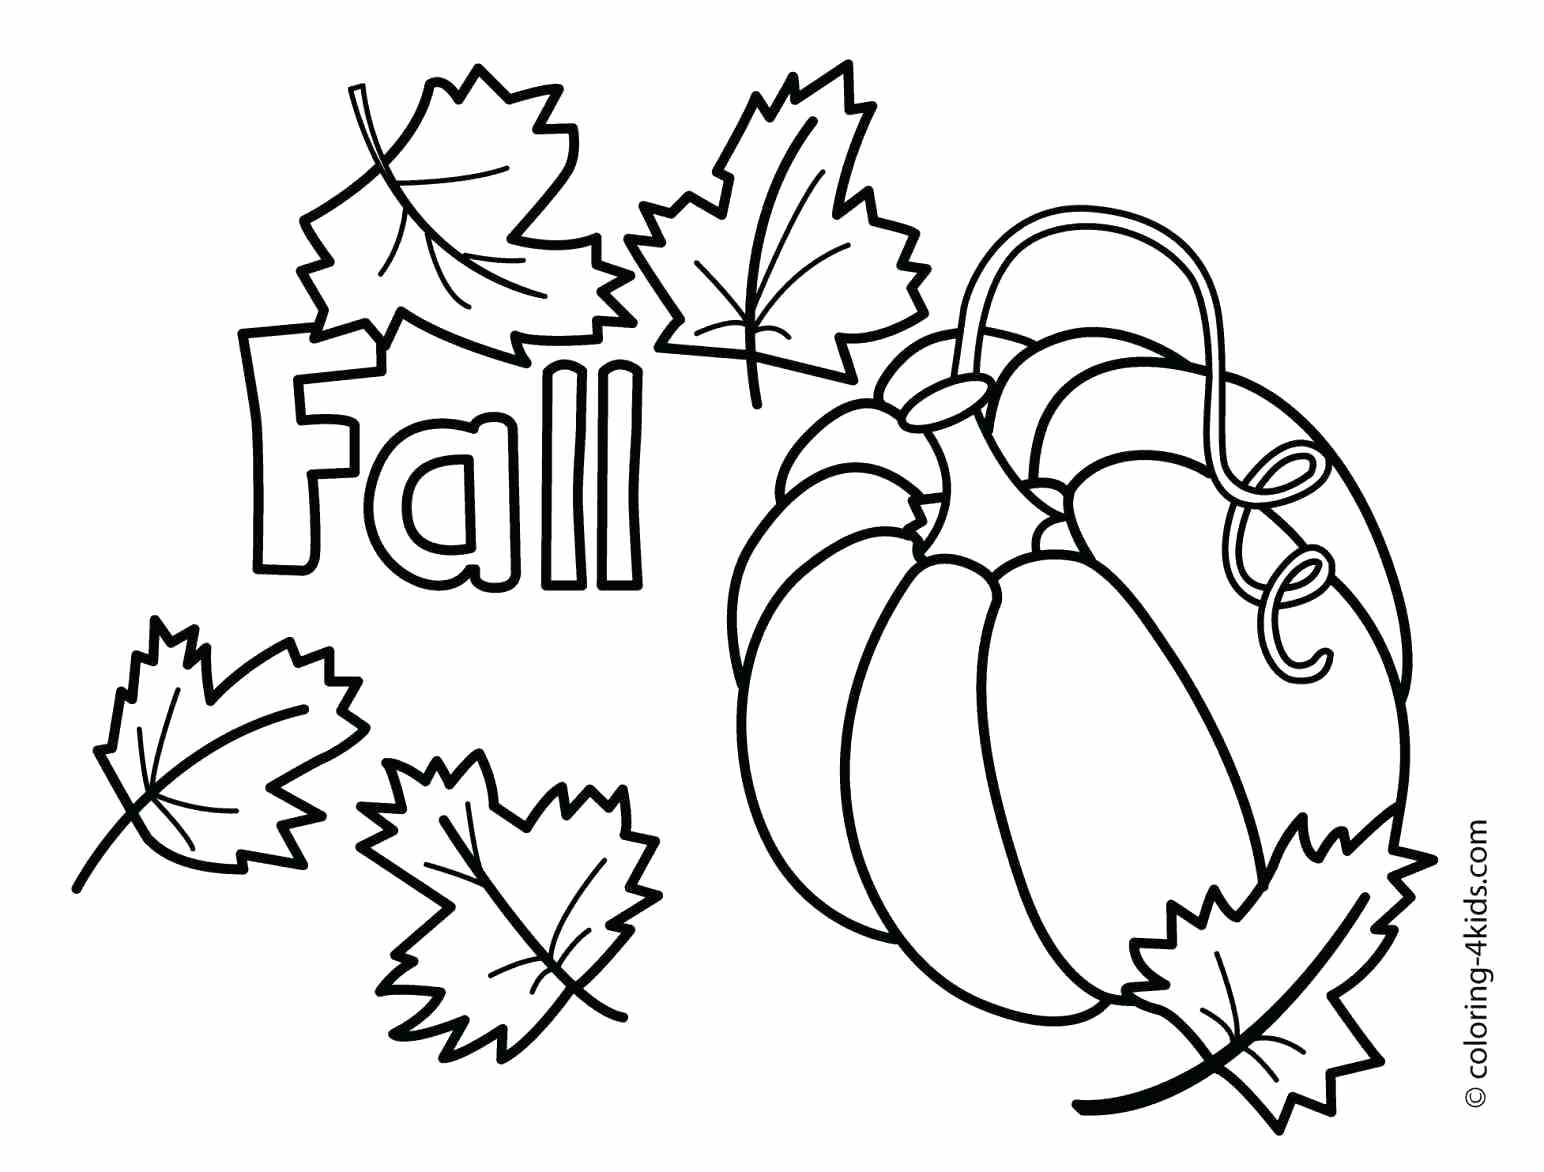 Pile Of Leaves Coloring Pages at GetColorings.com | Free printable ...